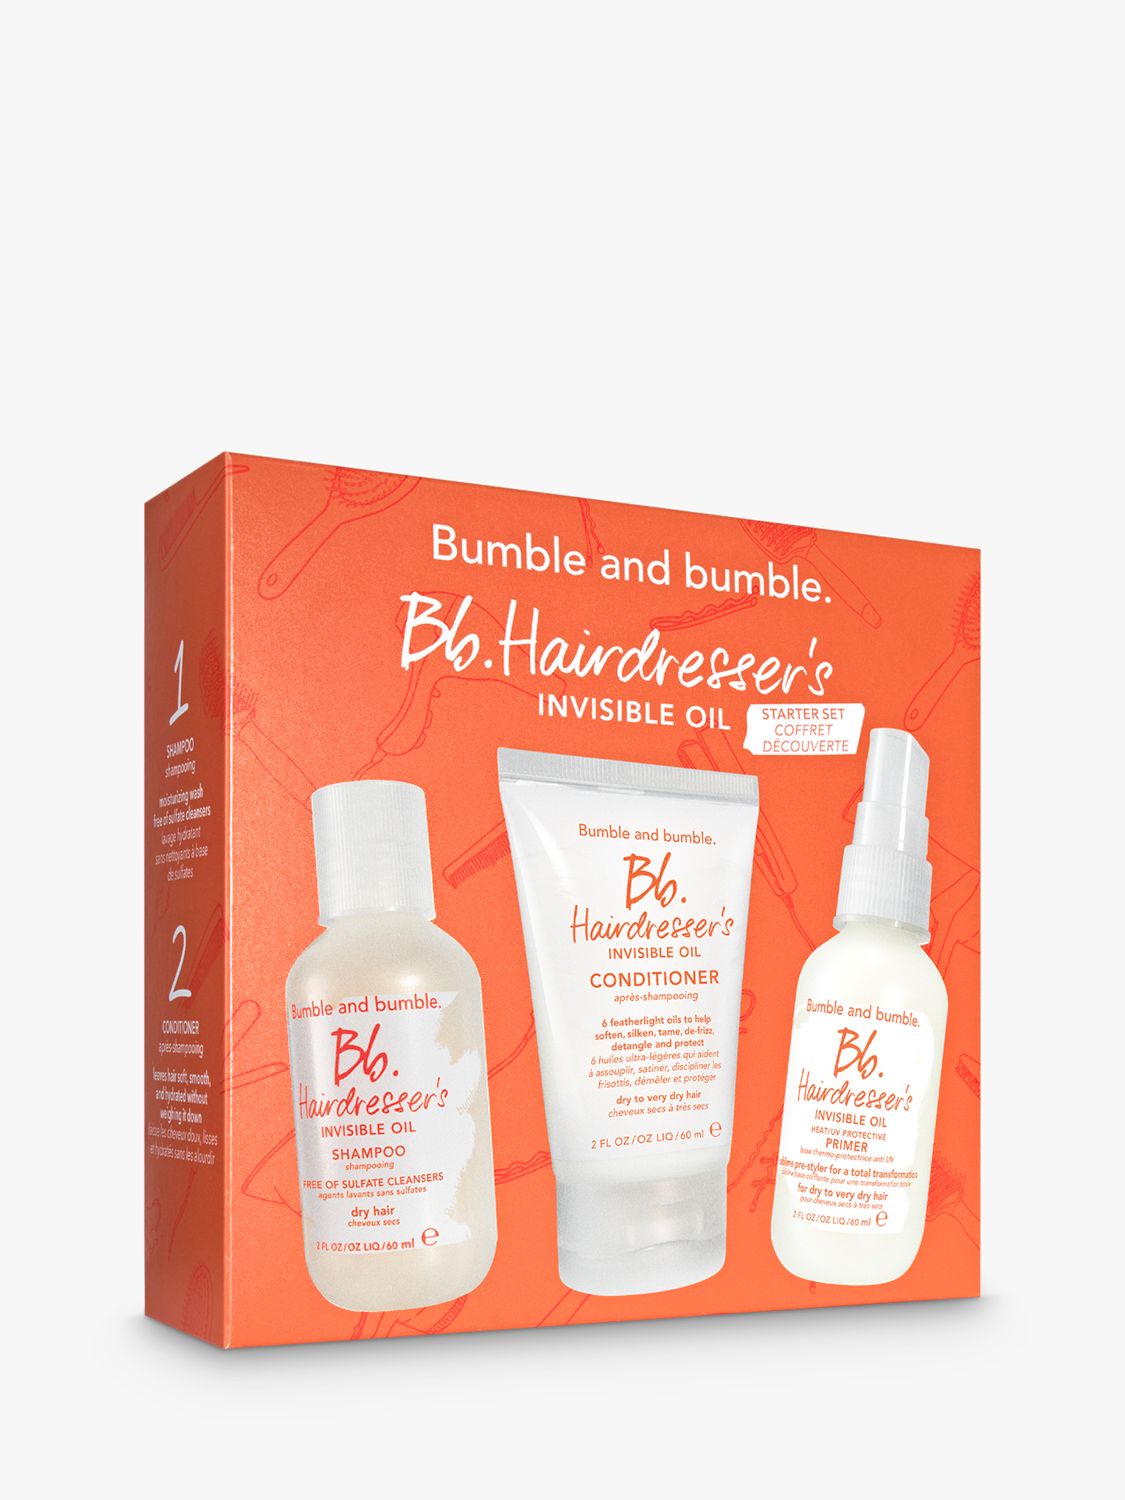 Bumble and bumble Hairdresser's Invisible Oil Starter Haircare Gift Set 2